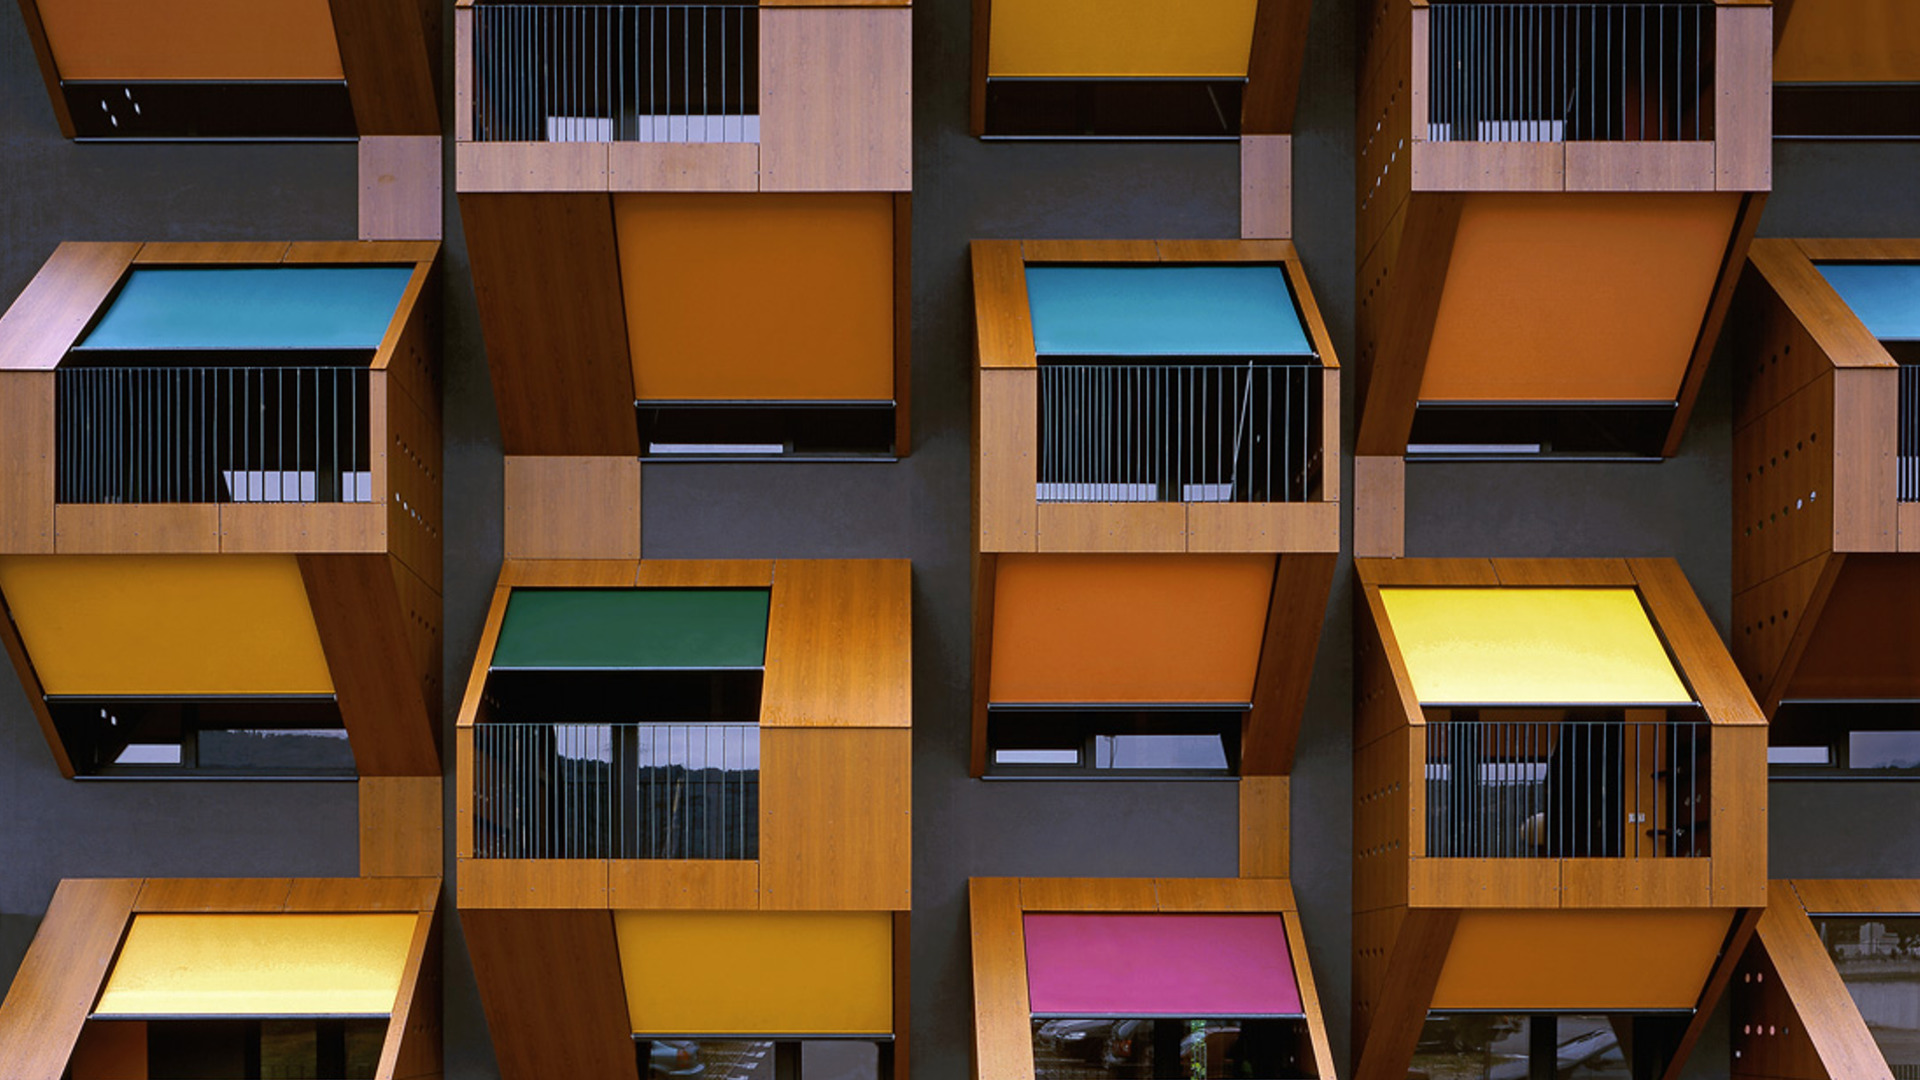 architecture, Building, Modern, Window, Balconies, Walls, Warm Colors, Geometry, Texas, USA, Apartments Wallpaper